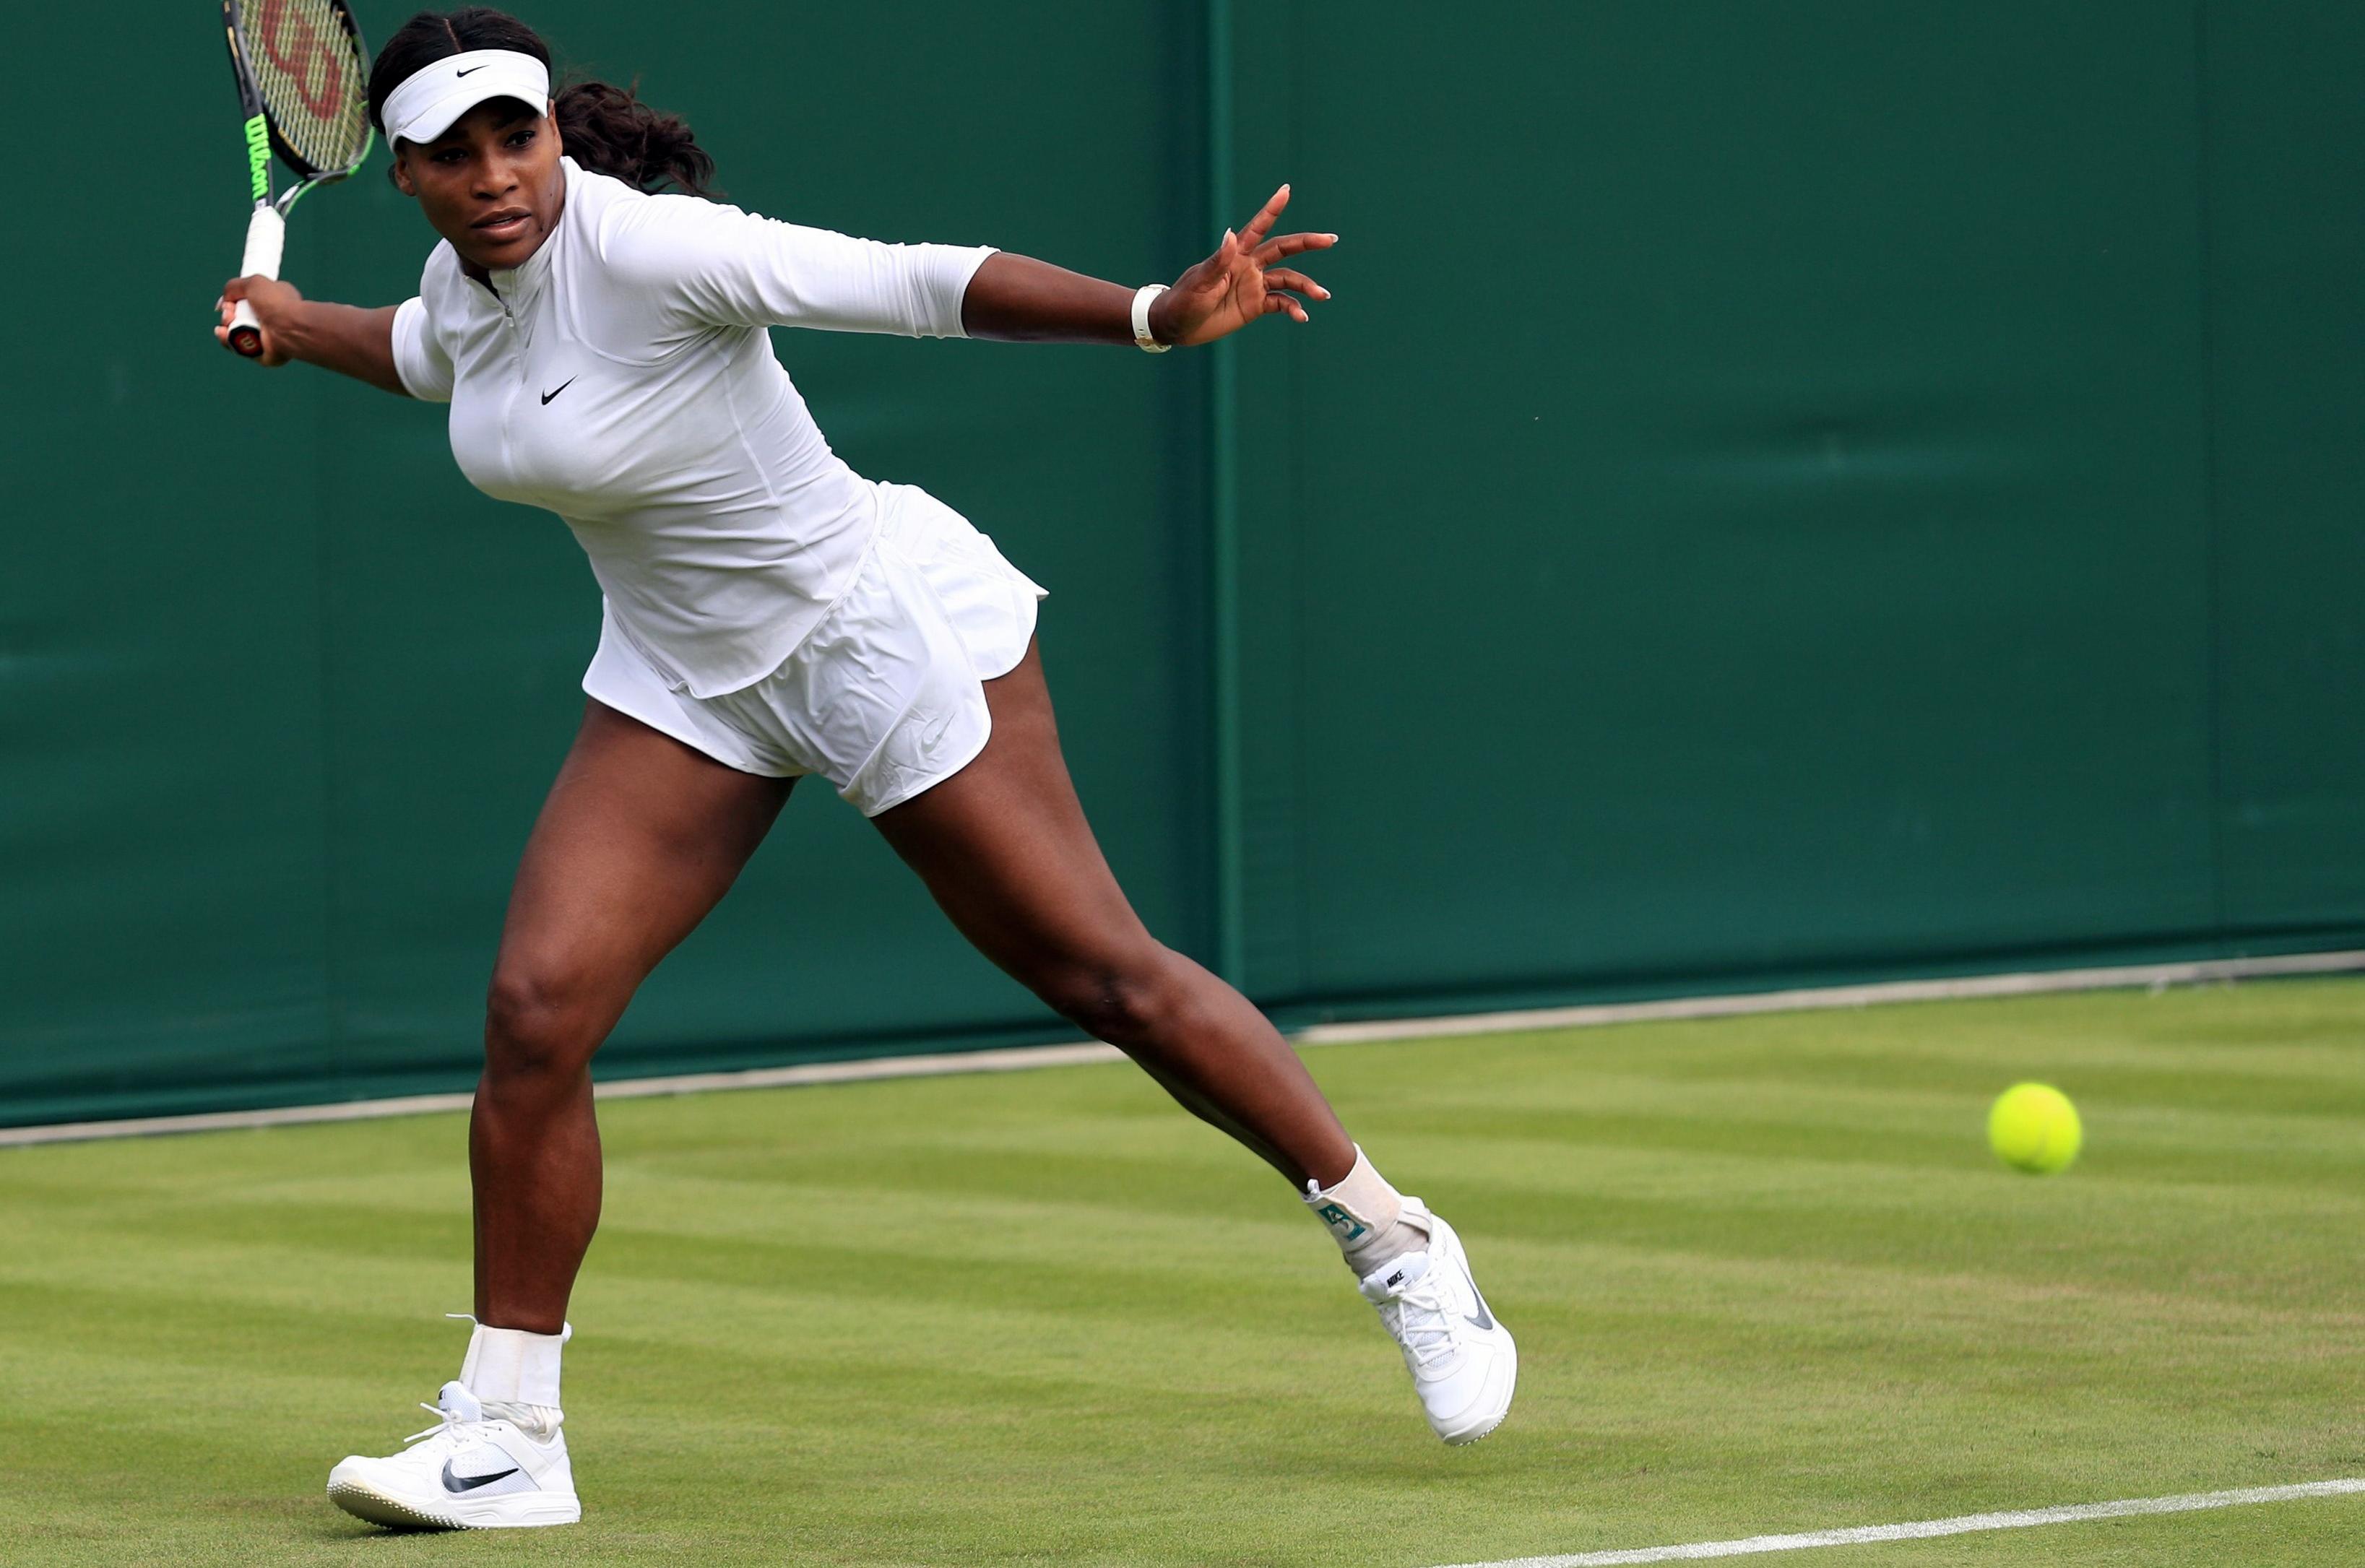 Defending champ Serena Williams at Wimbledon ready to play The